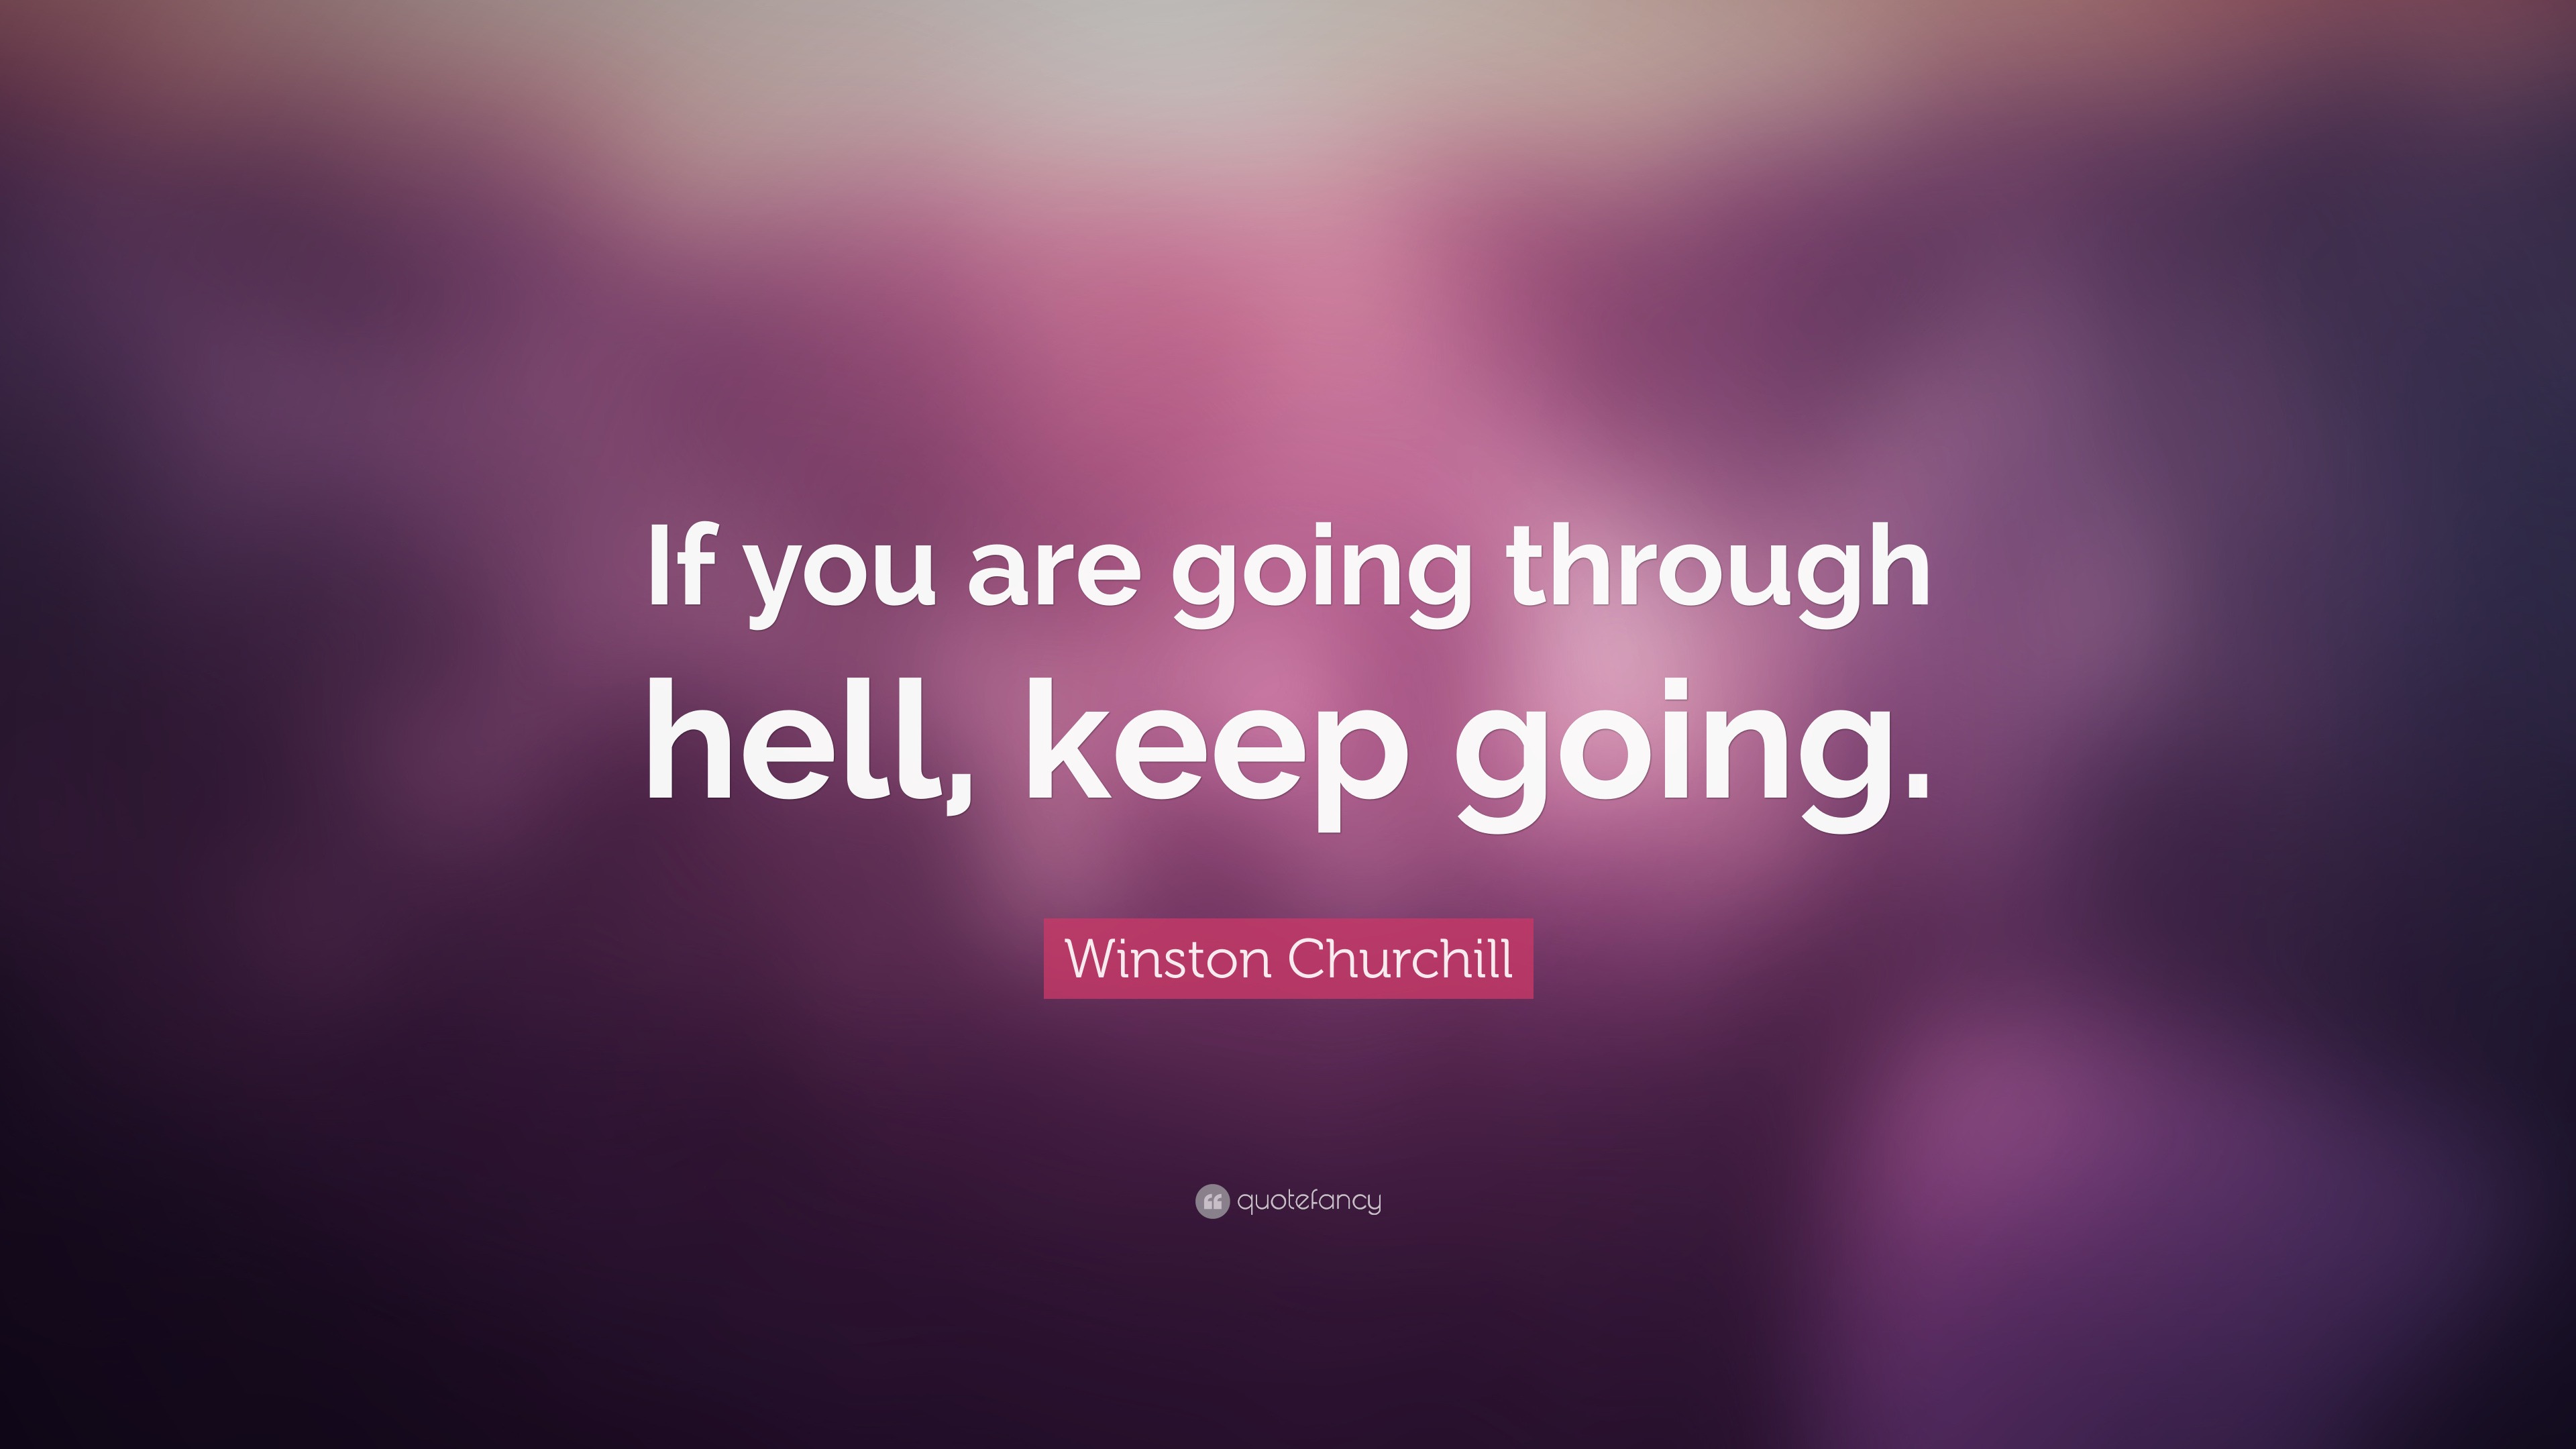 Winston Churchill Quote: “If you are going through hell, keep going